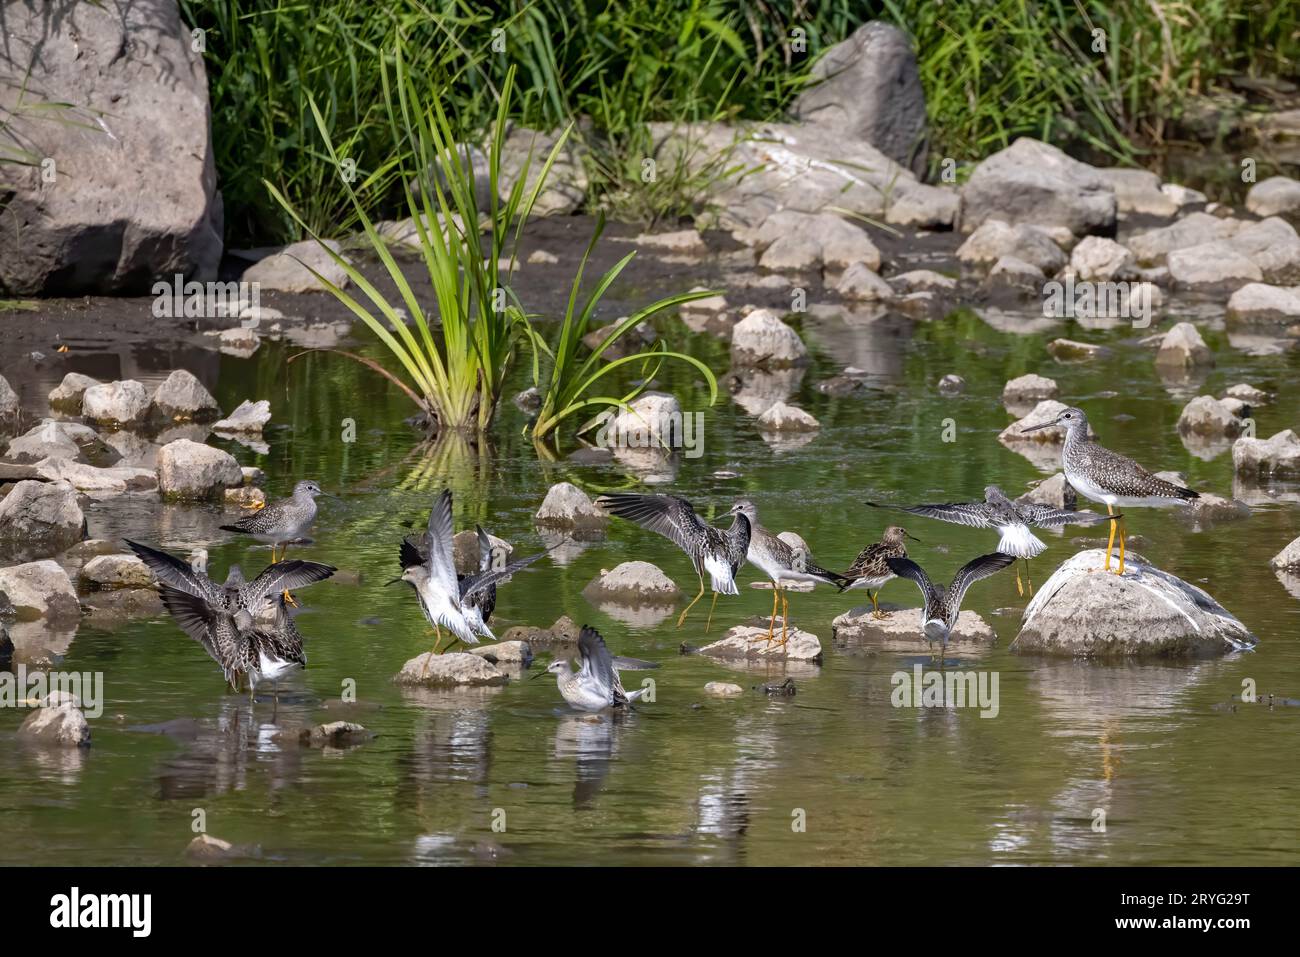 A shorebirds looking for food in shallow water in a river Stock Photo